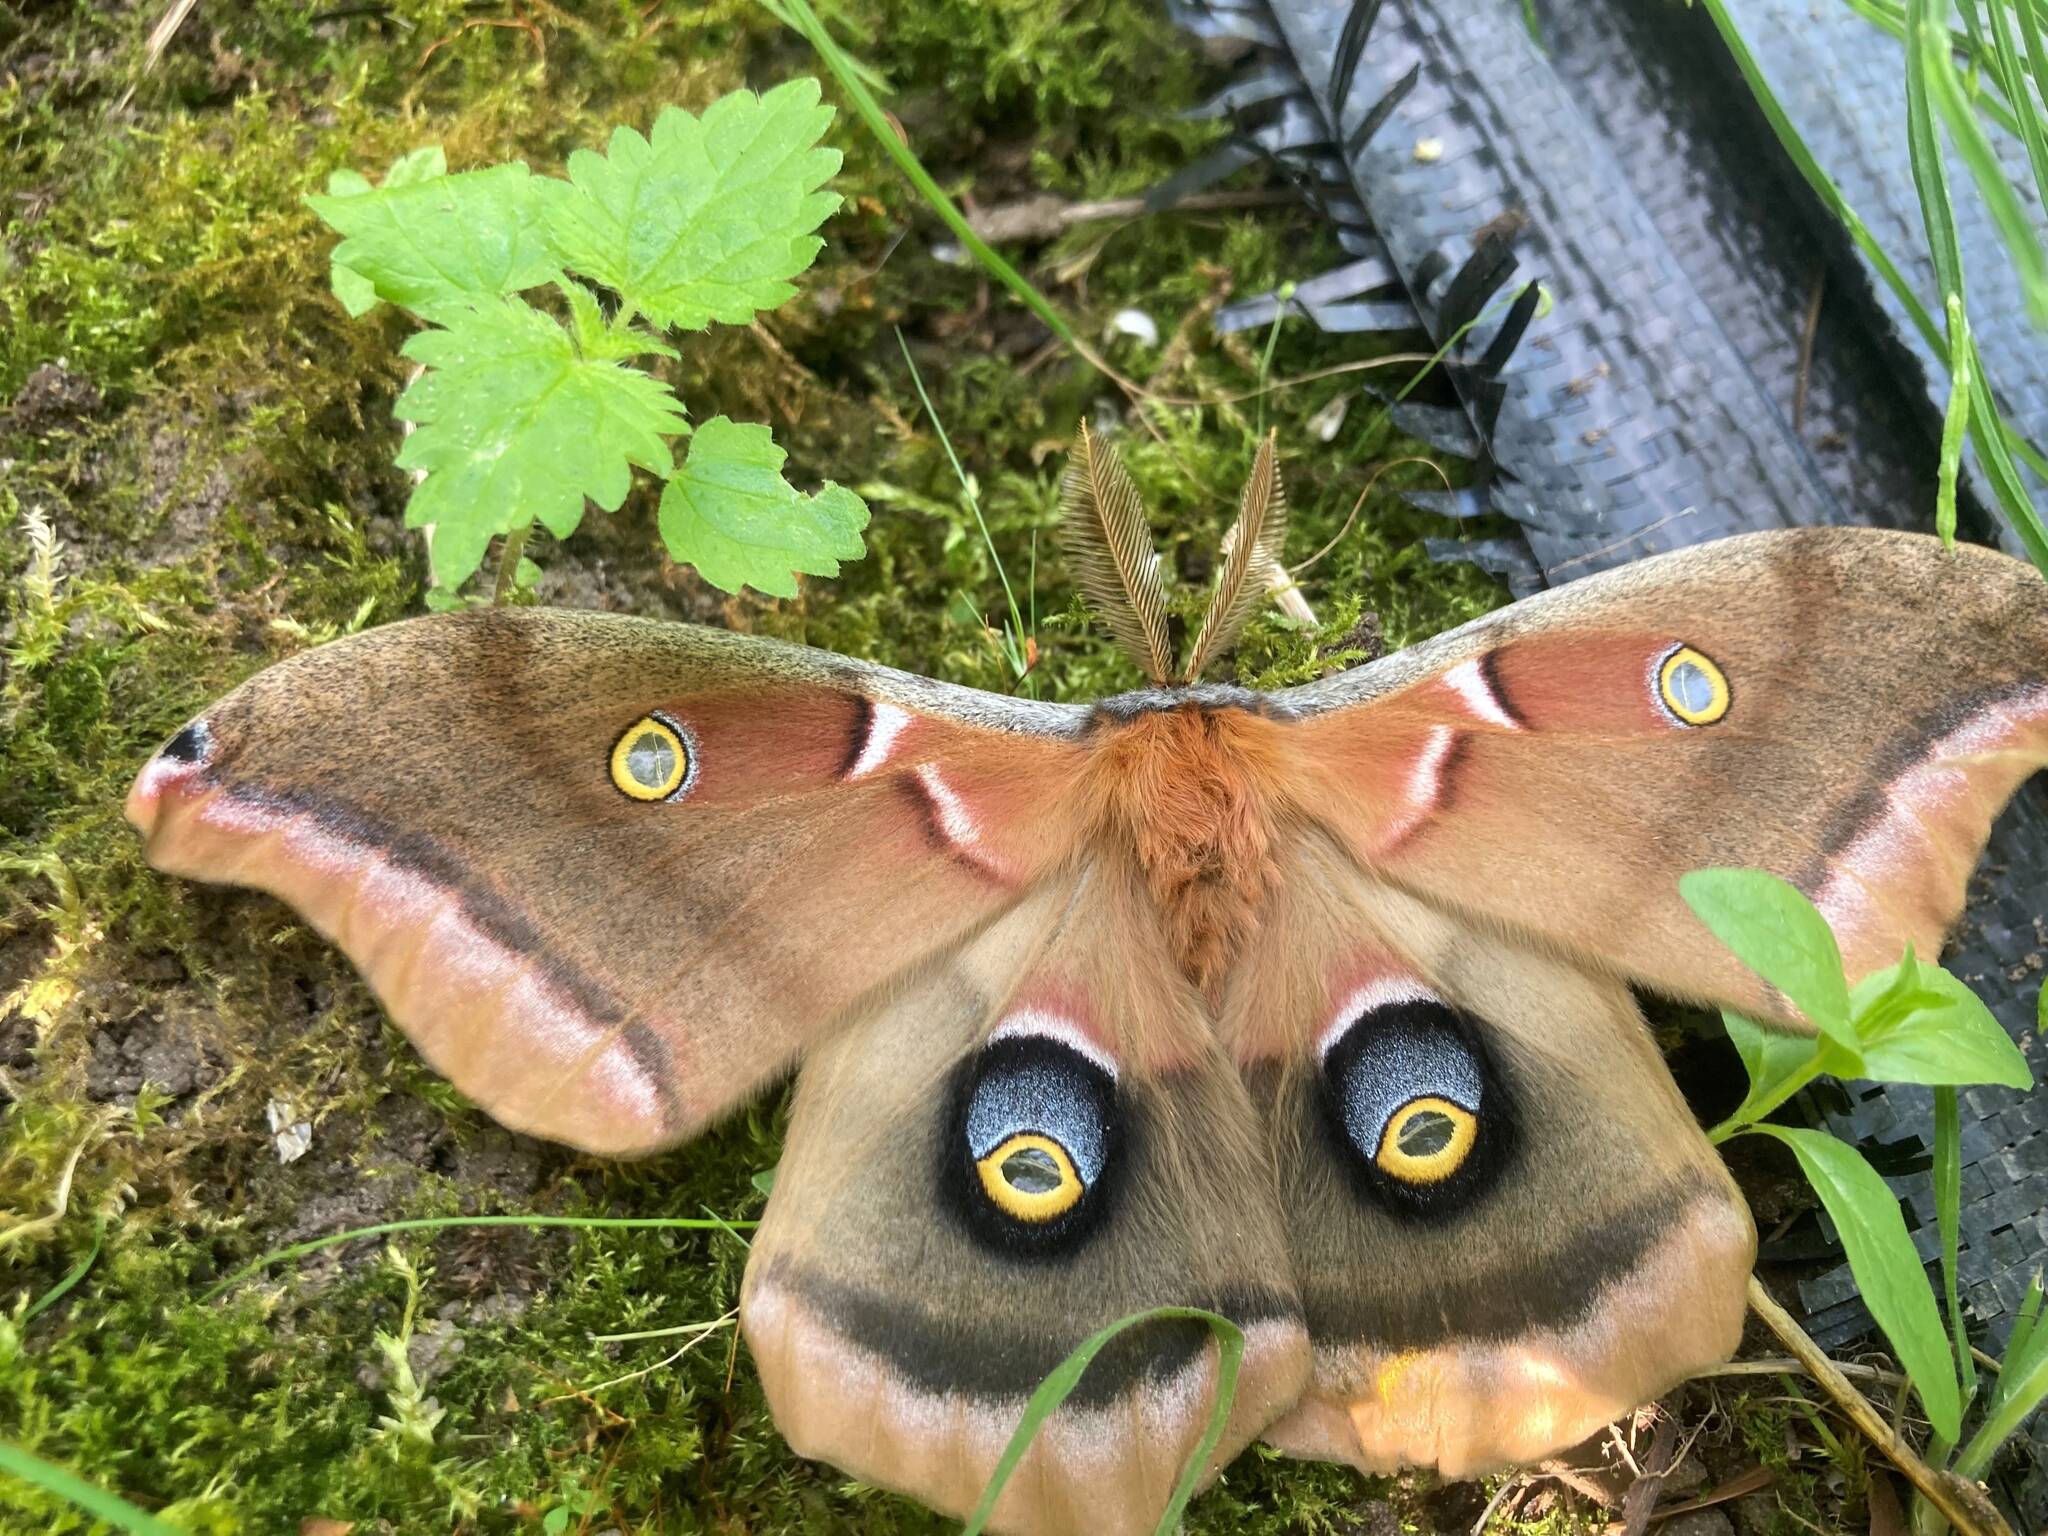 A polyphemus moth measuring about 6 inches across was detected in the meadow by Haley Wiggins.